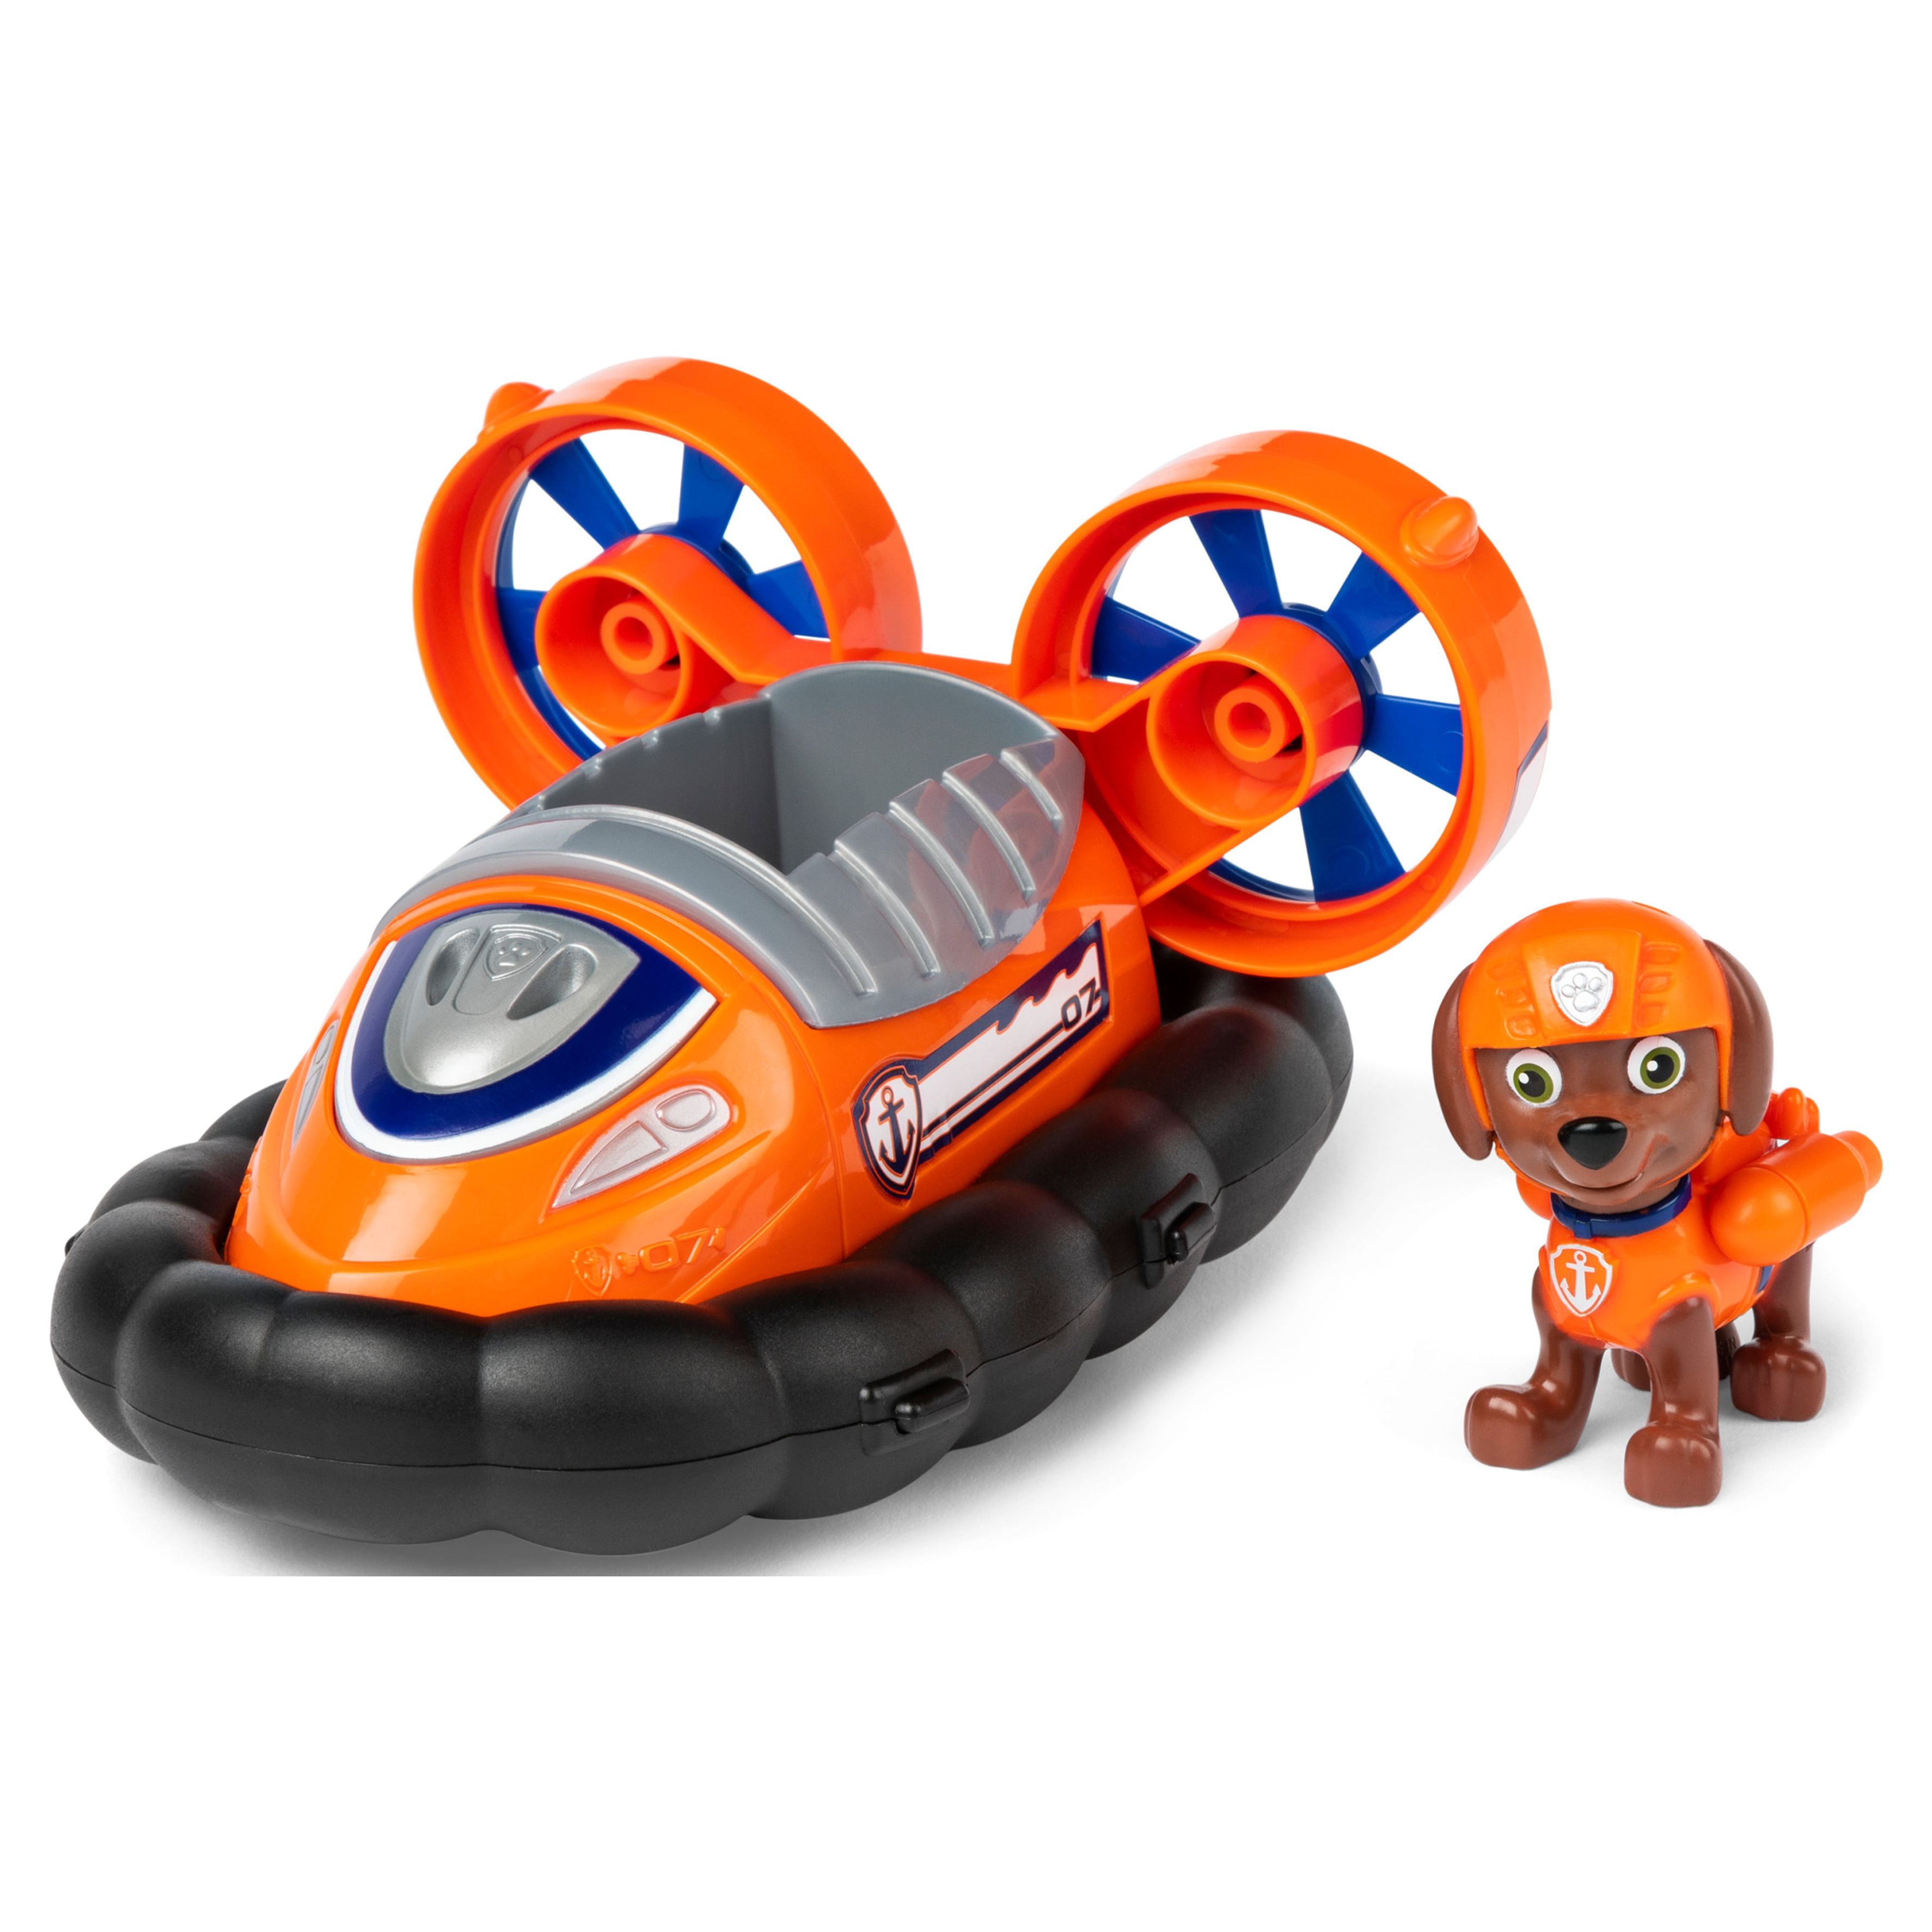 PAW Patrol, Zuma’s Hovercraft Vehicle with Collectible Figure, for Kids Aged 3 and Up - image 1 of 6